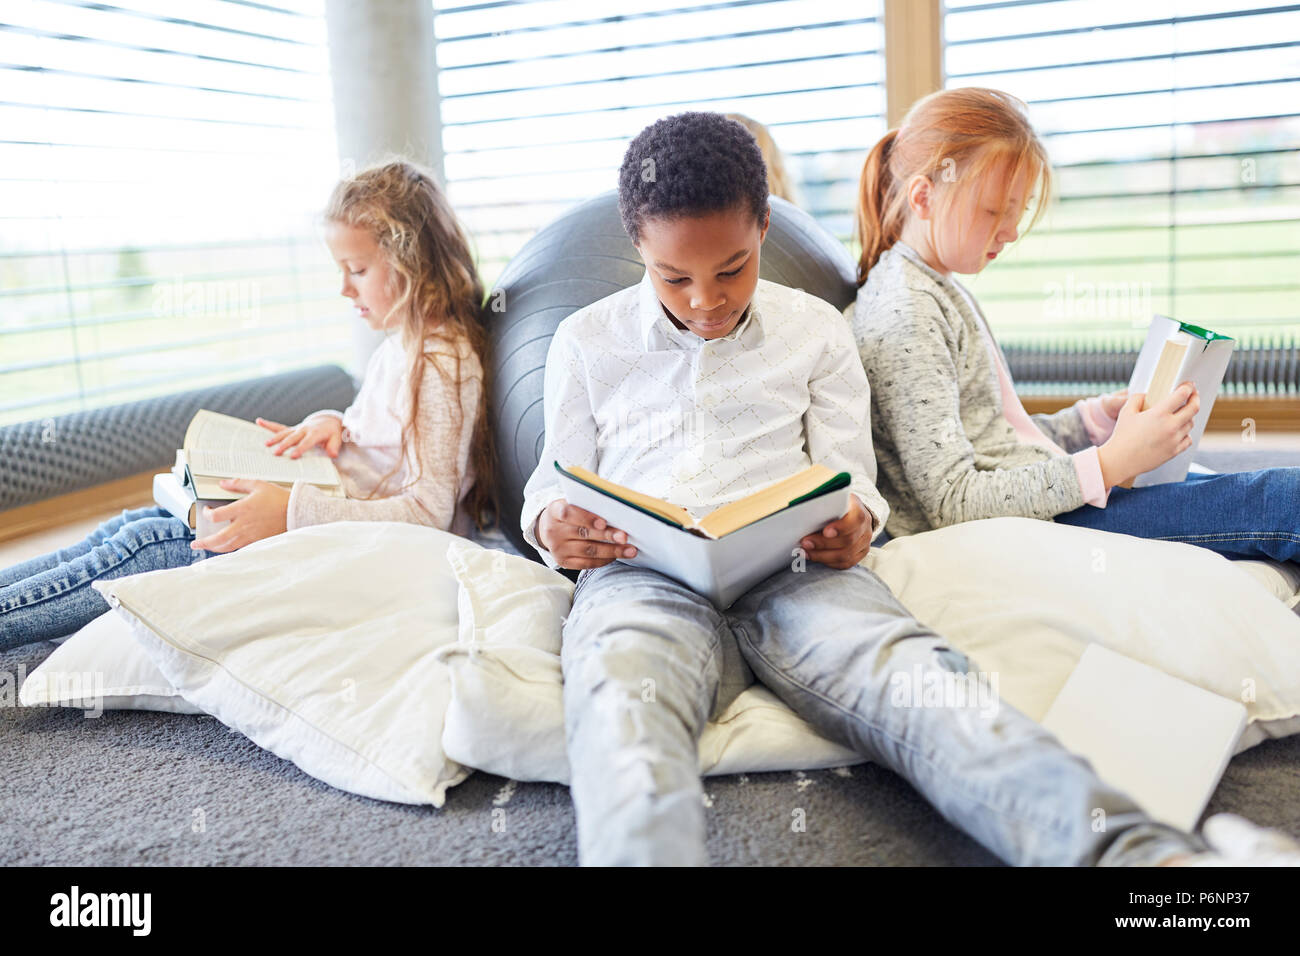 Group of children together read books in a primary school reading room Stock Photo